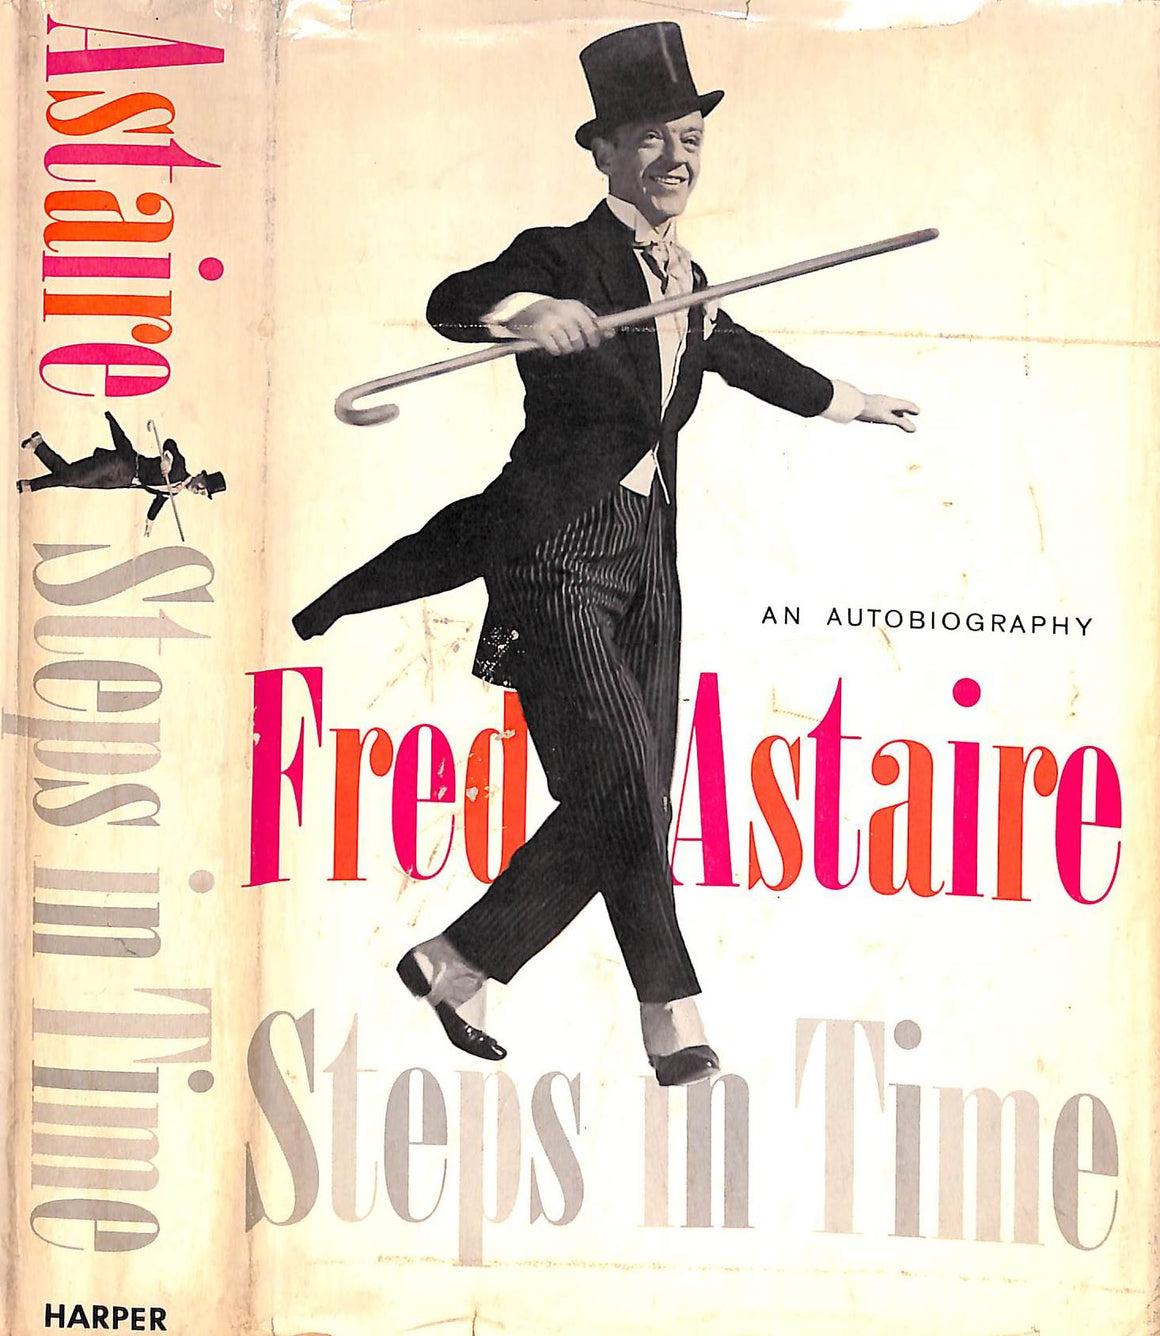 "Steps In Time" 1959 ASTAIRE, Fred (INSCRIBED)